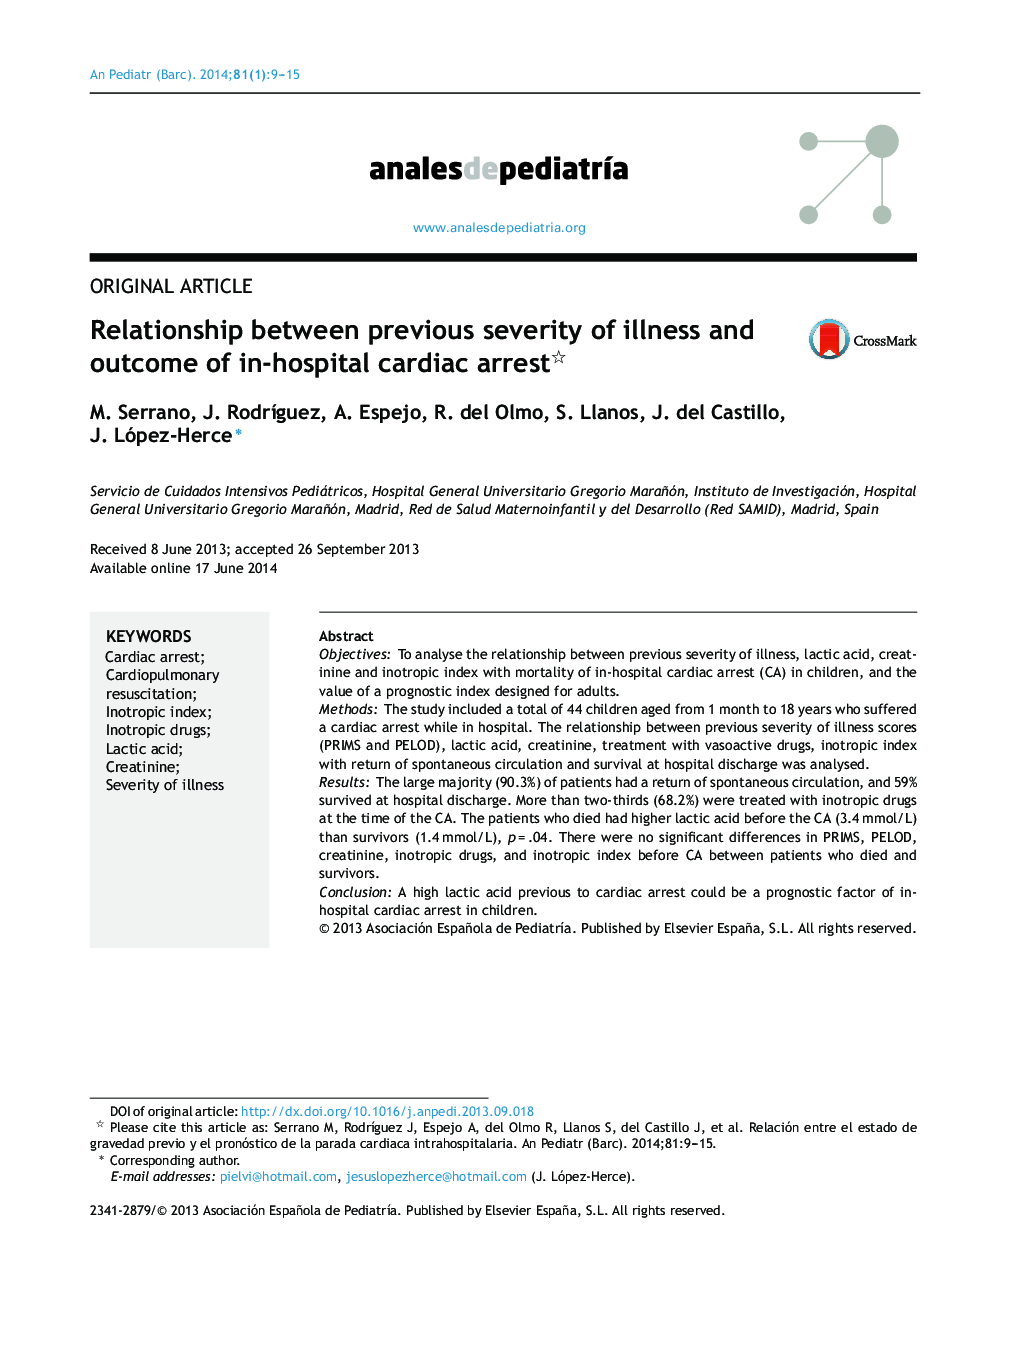 Relationship between previous severity of illness and outcome of in-hospital cardiac arrest 